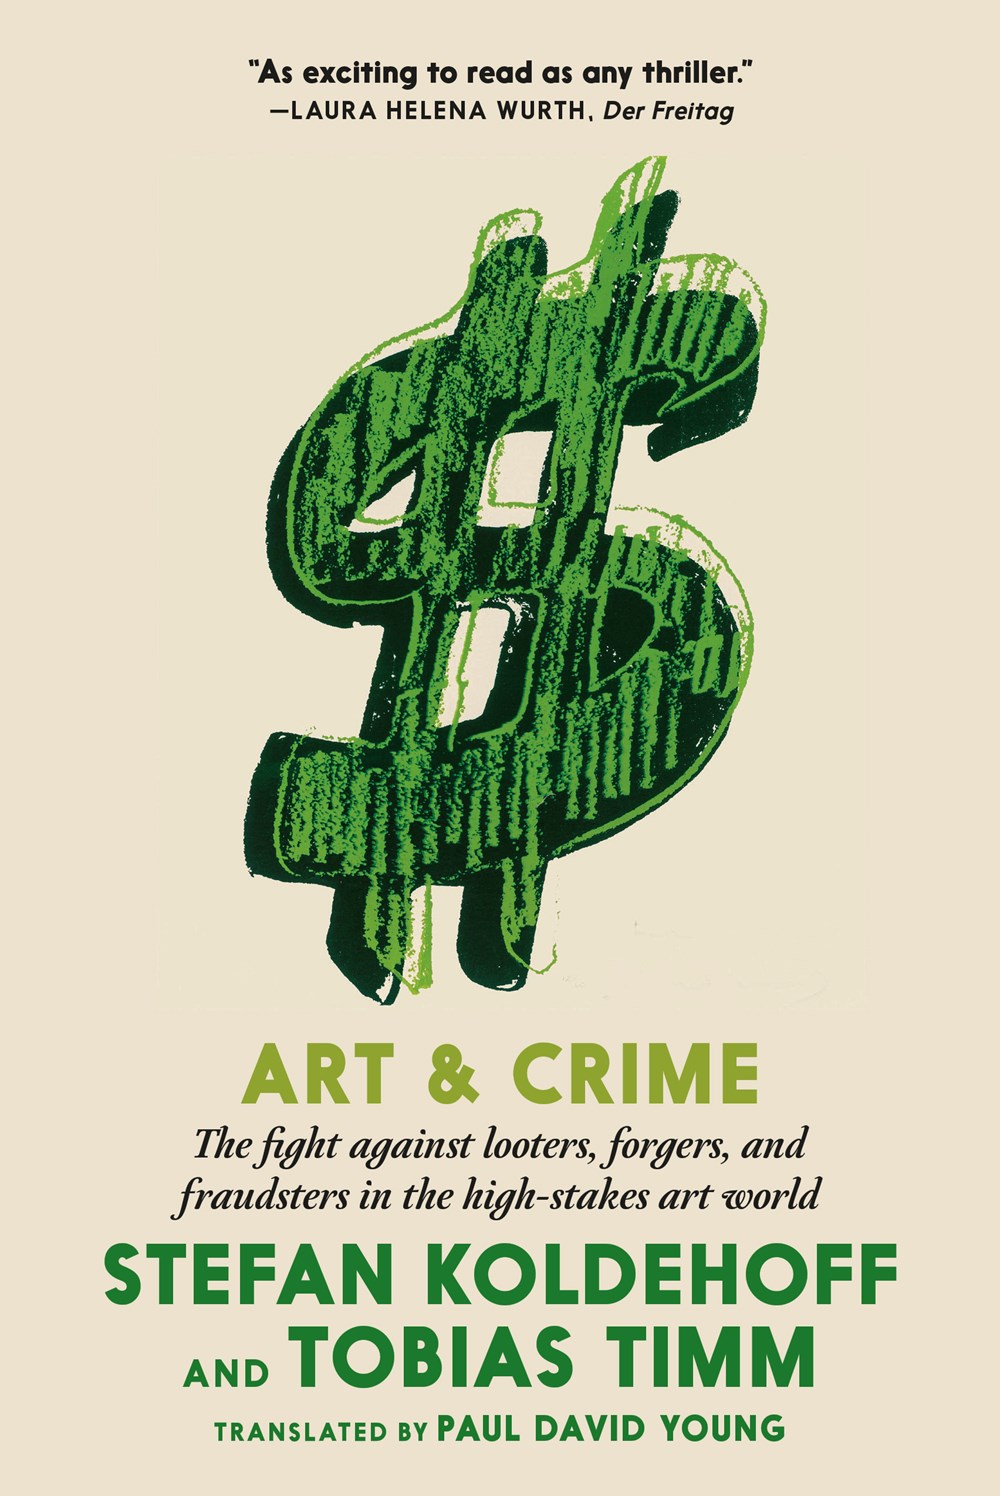 The cover for Stefan Koldehoff's 'Art and Crime'.